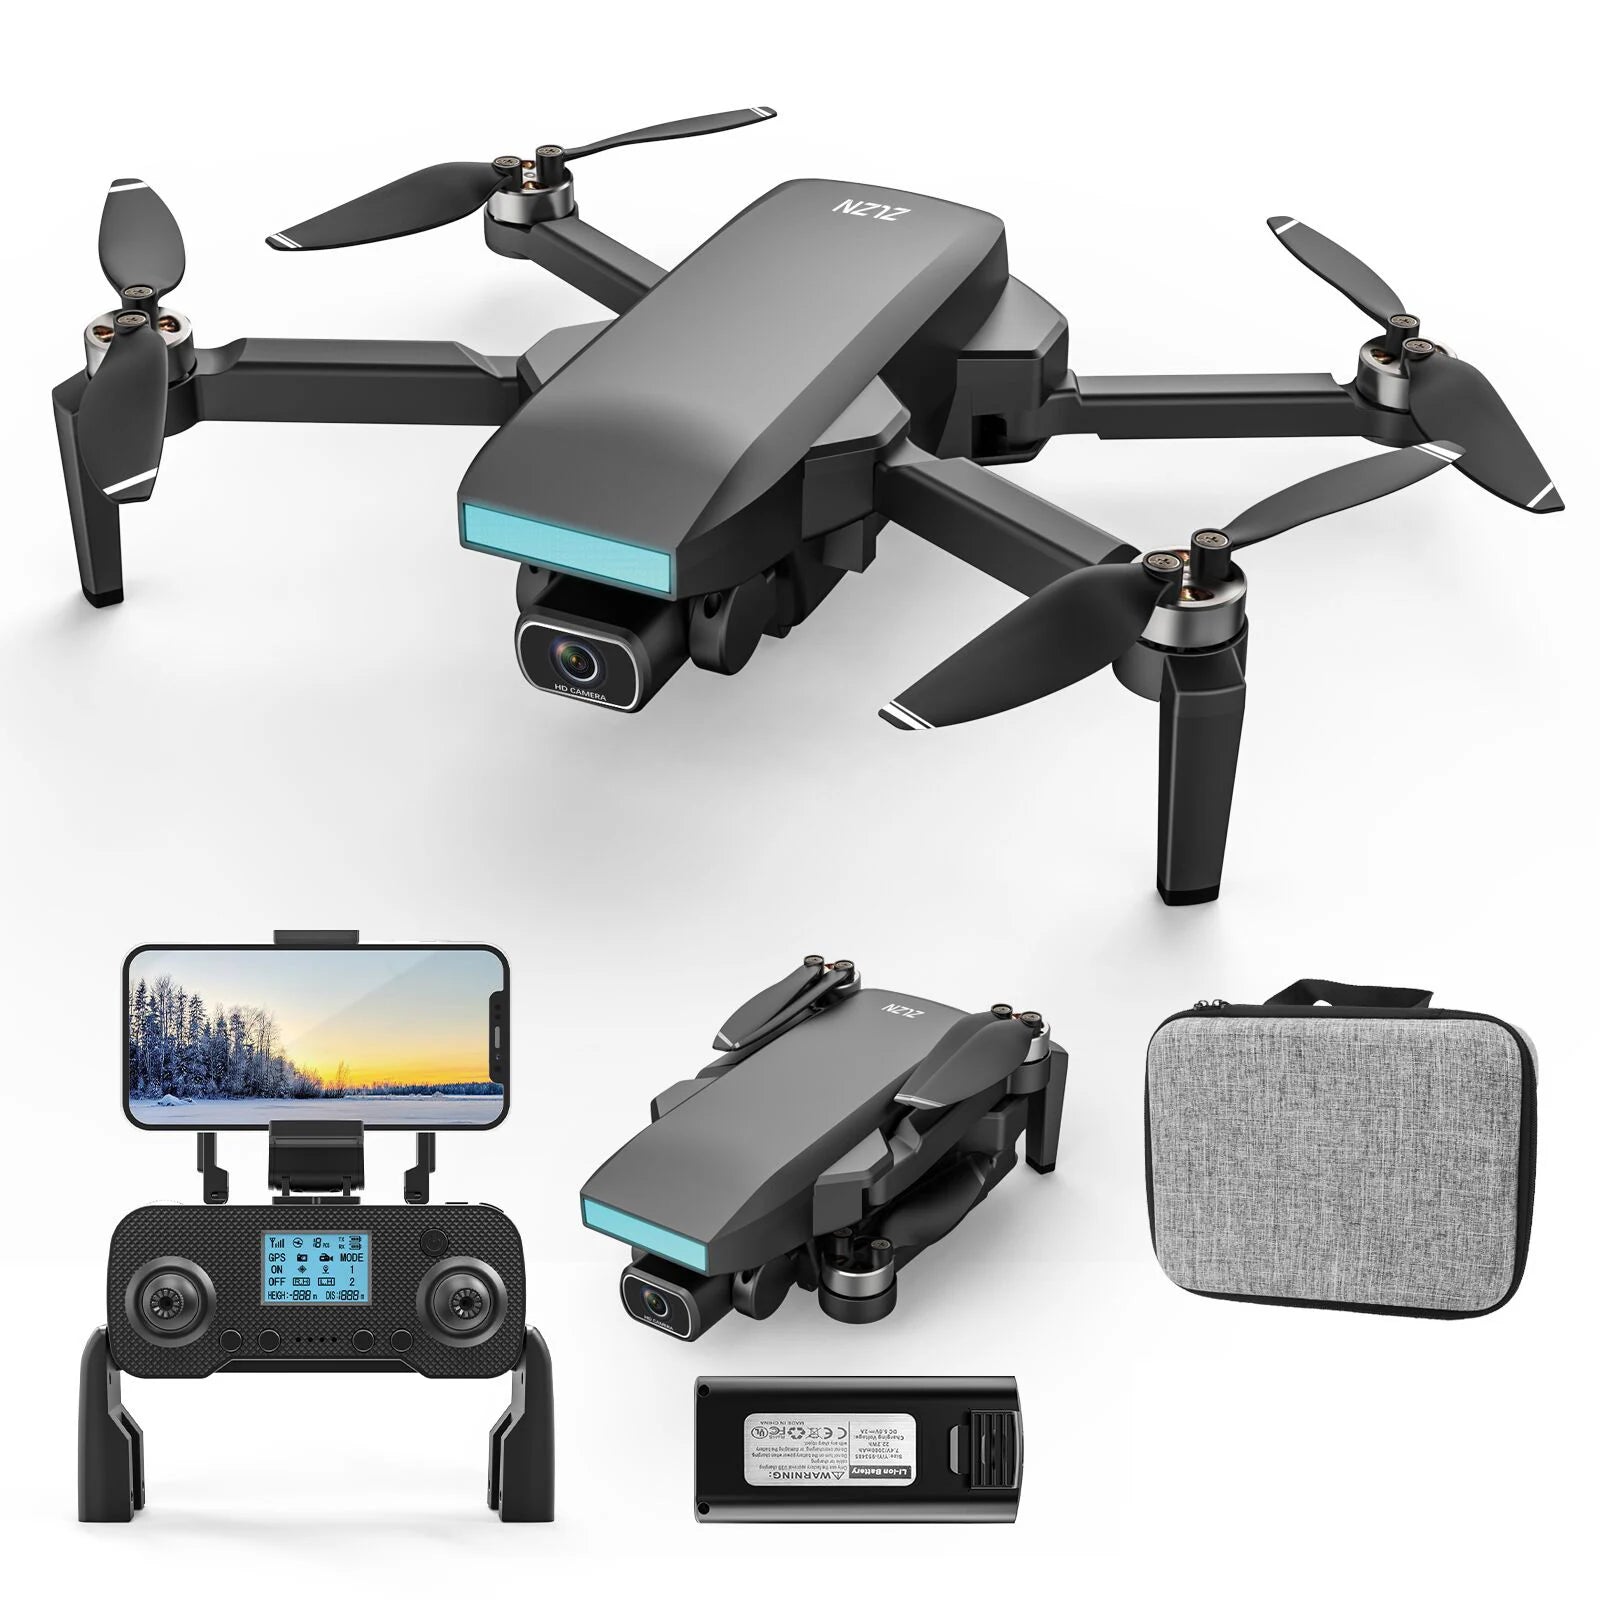 ZLL SG107 Pro Drone, connect to the wifi, and control the drone via your mobile phone